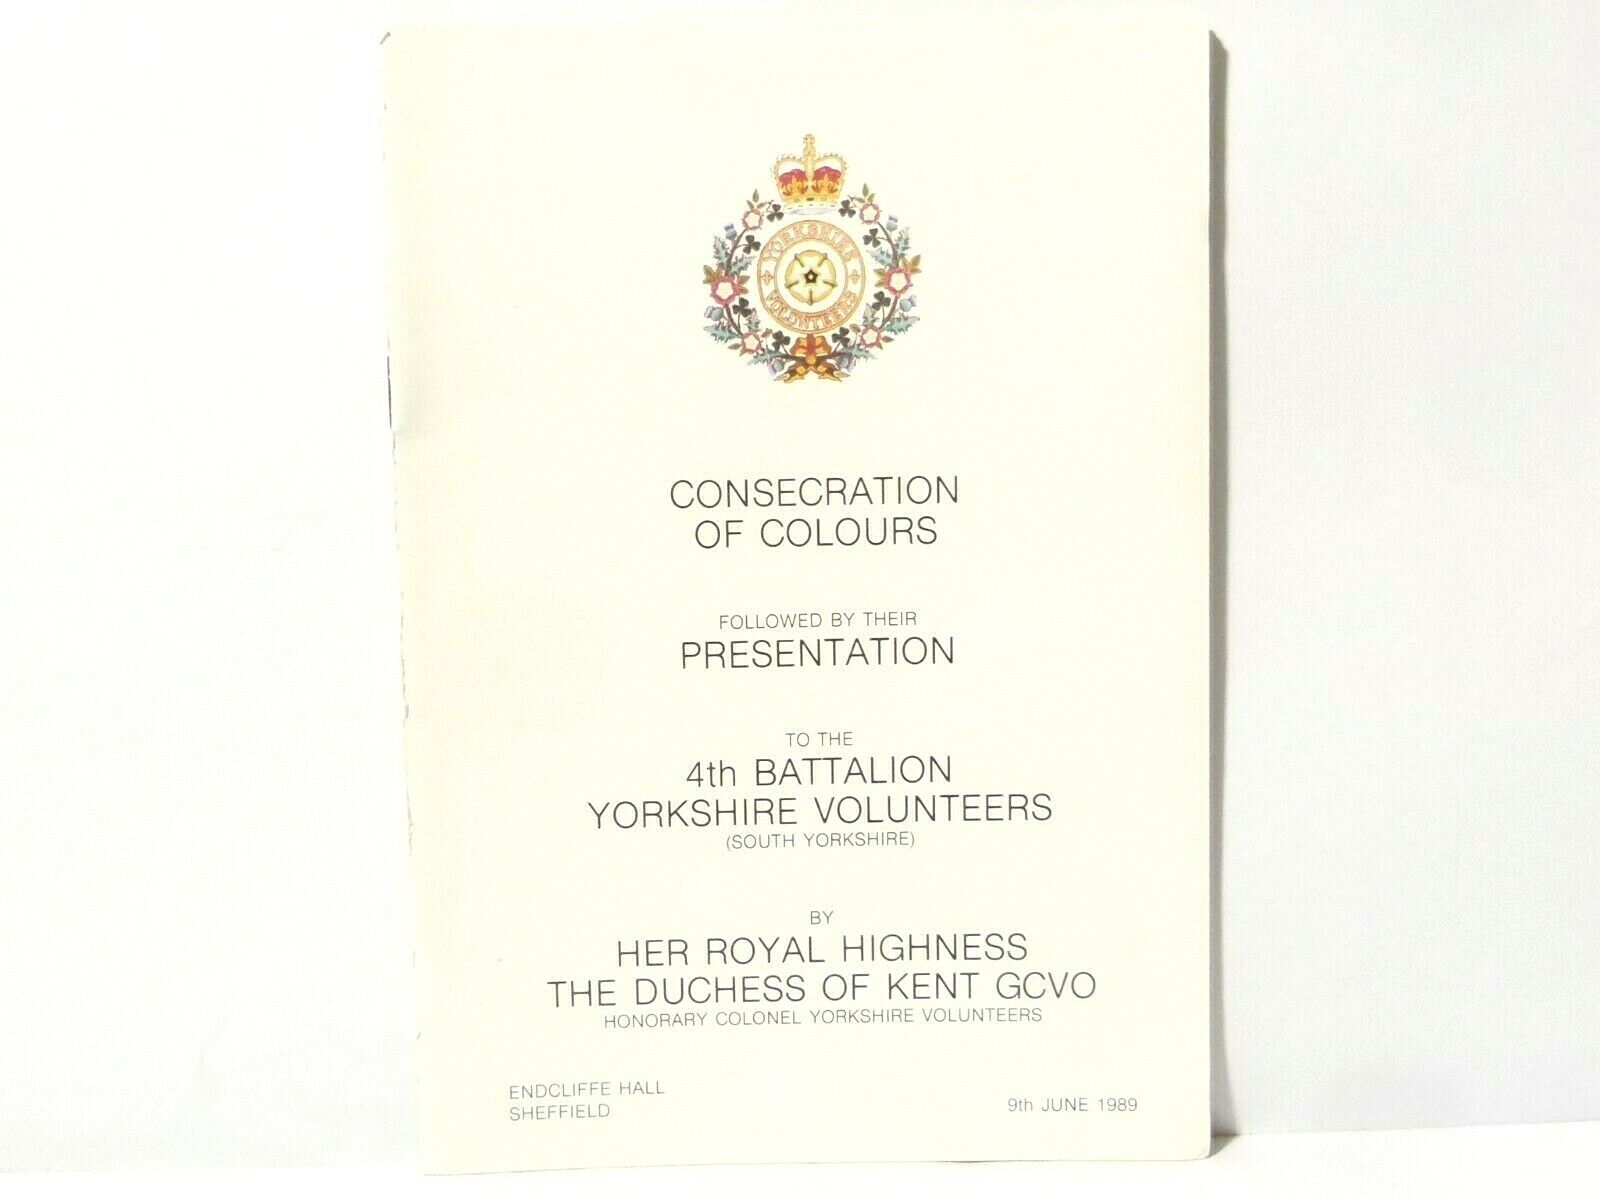 1989 4th Battalion Yorkshire Volunteers Consecration of Colours Programme